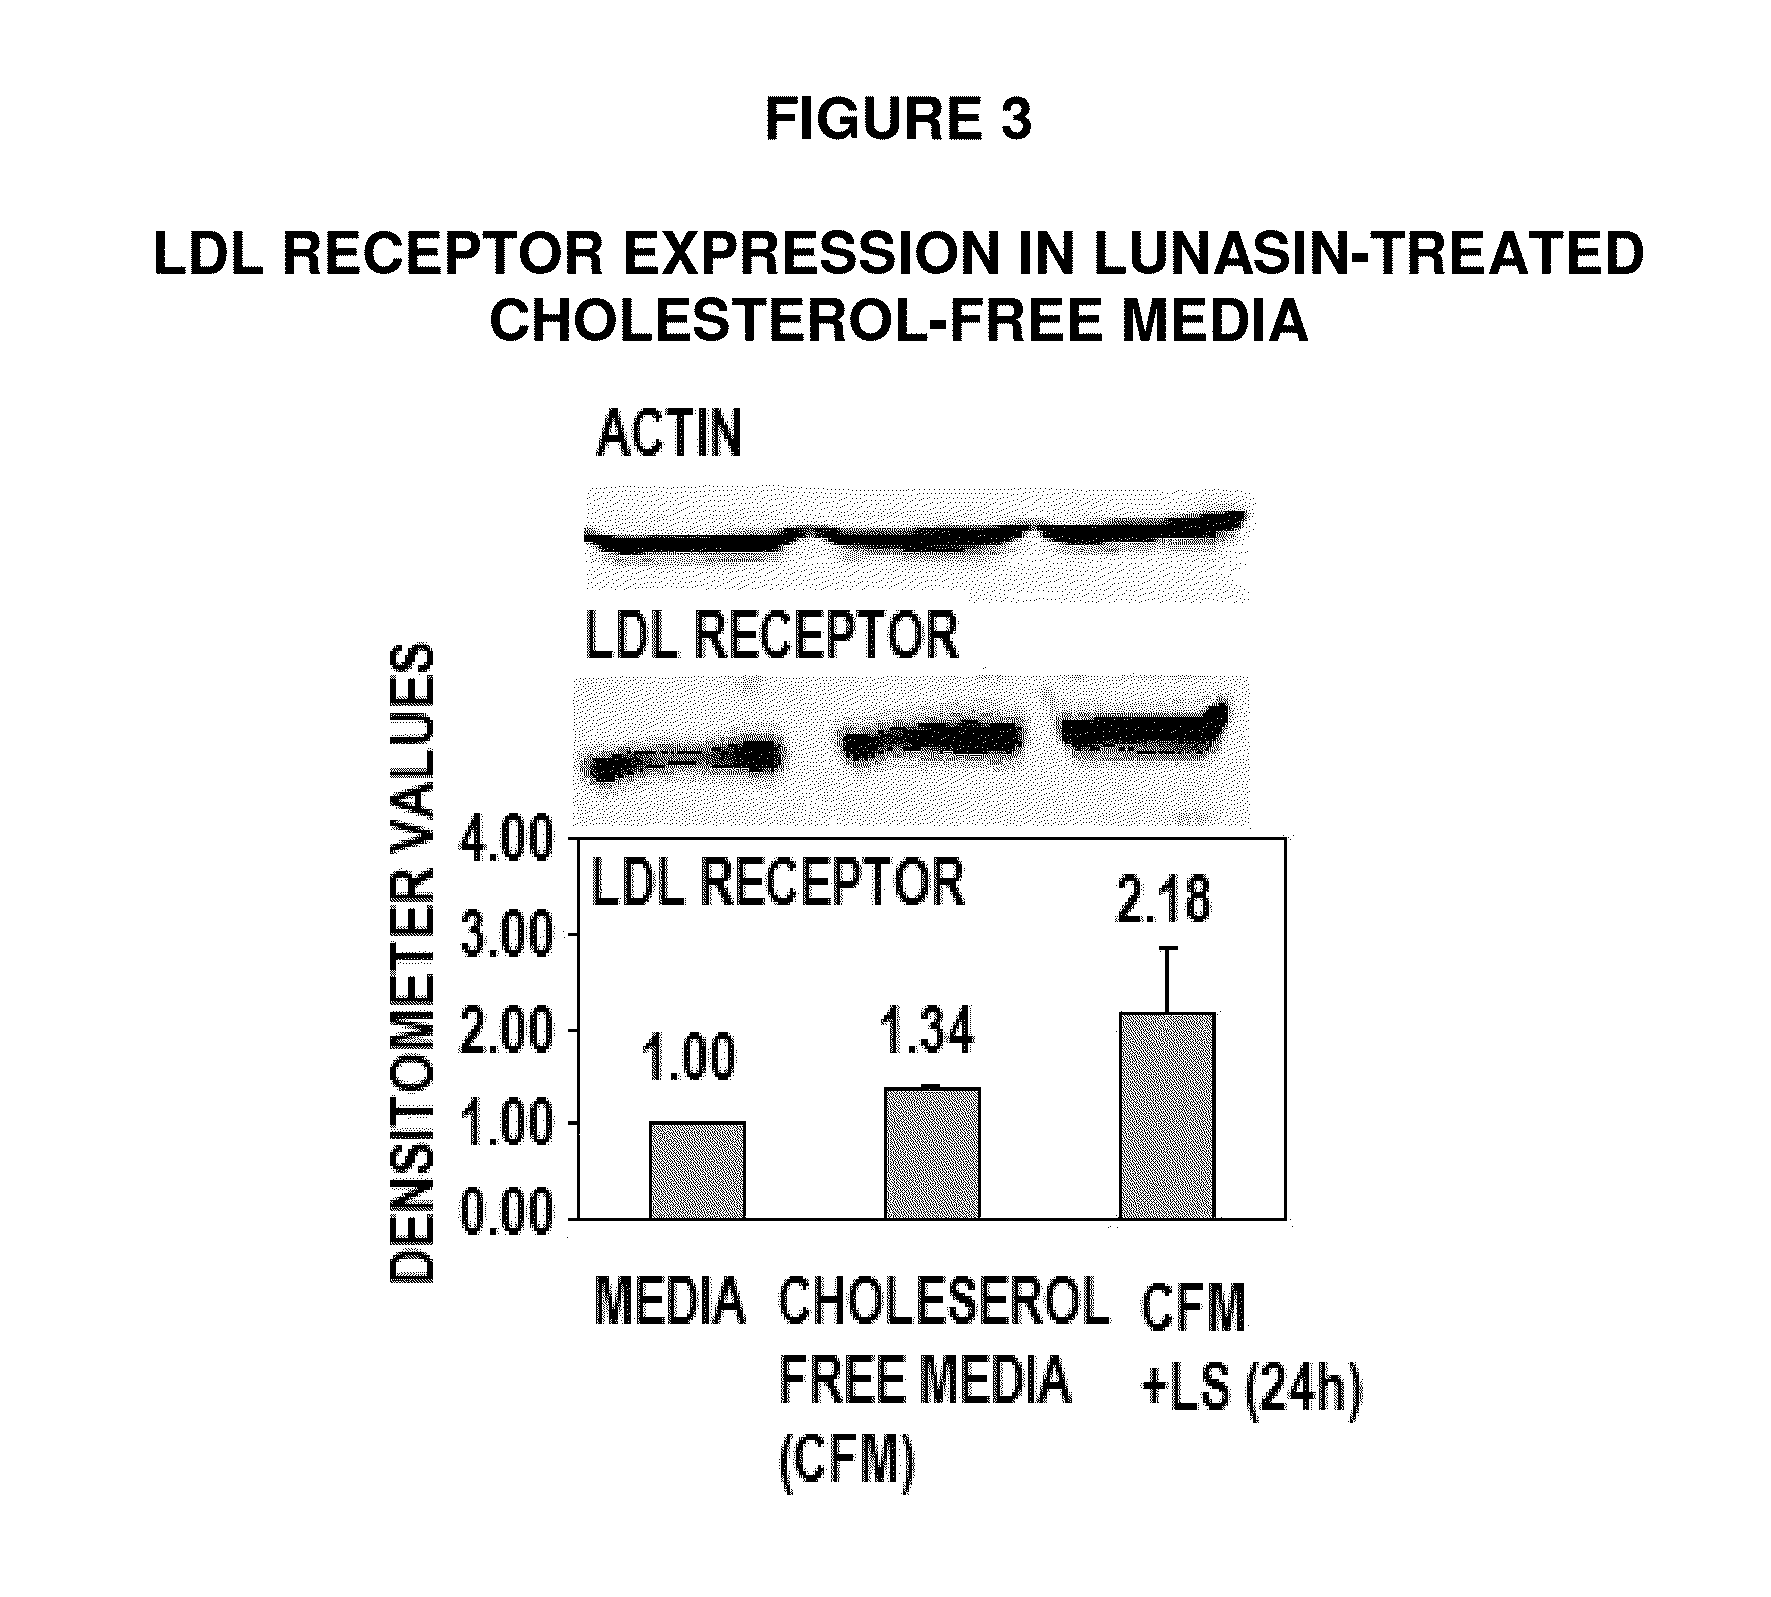 Products and methods using soy peptides to lower total and LDL cholesterol levels